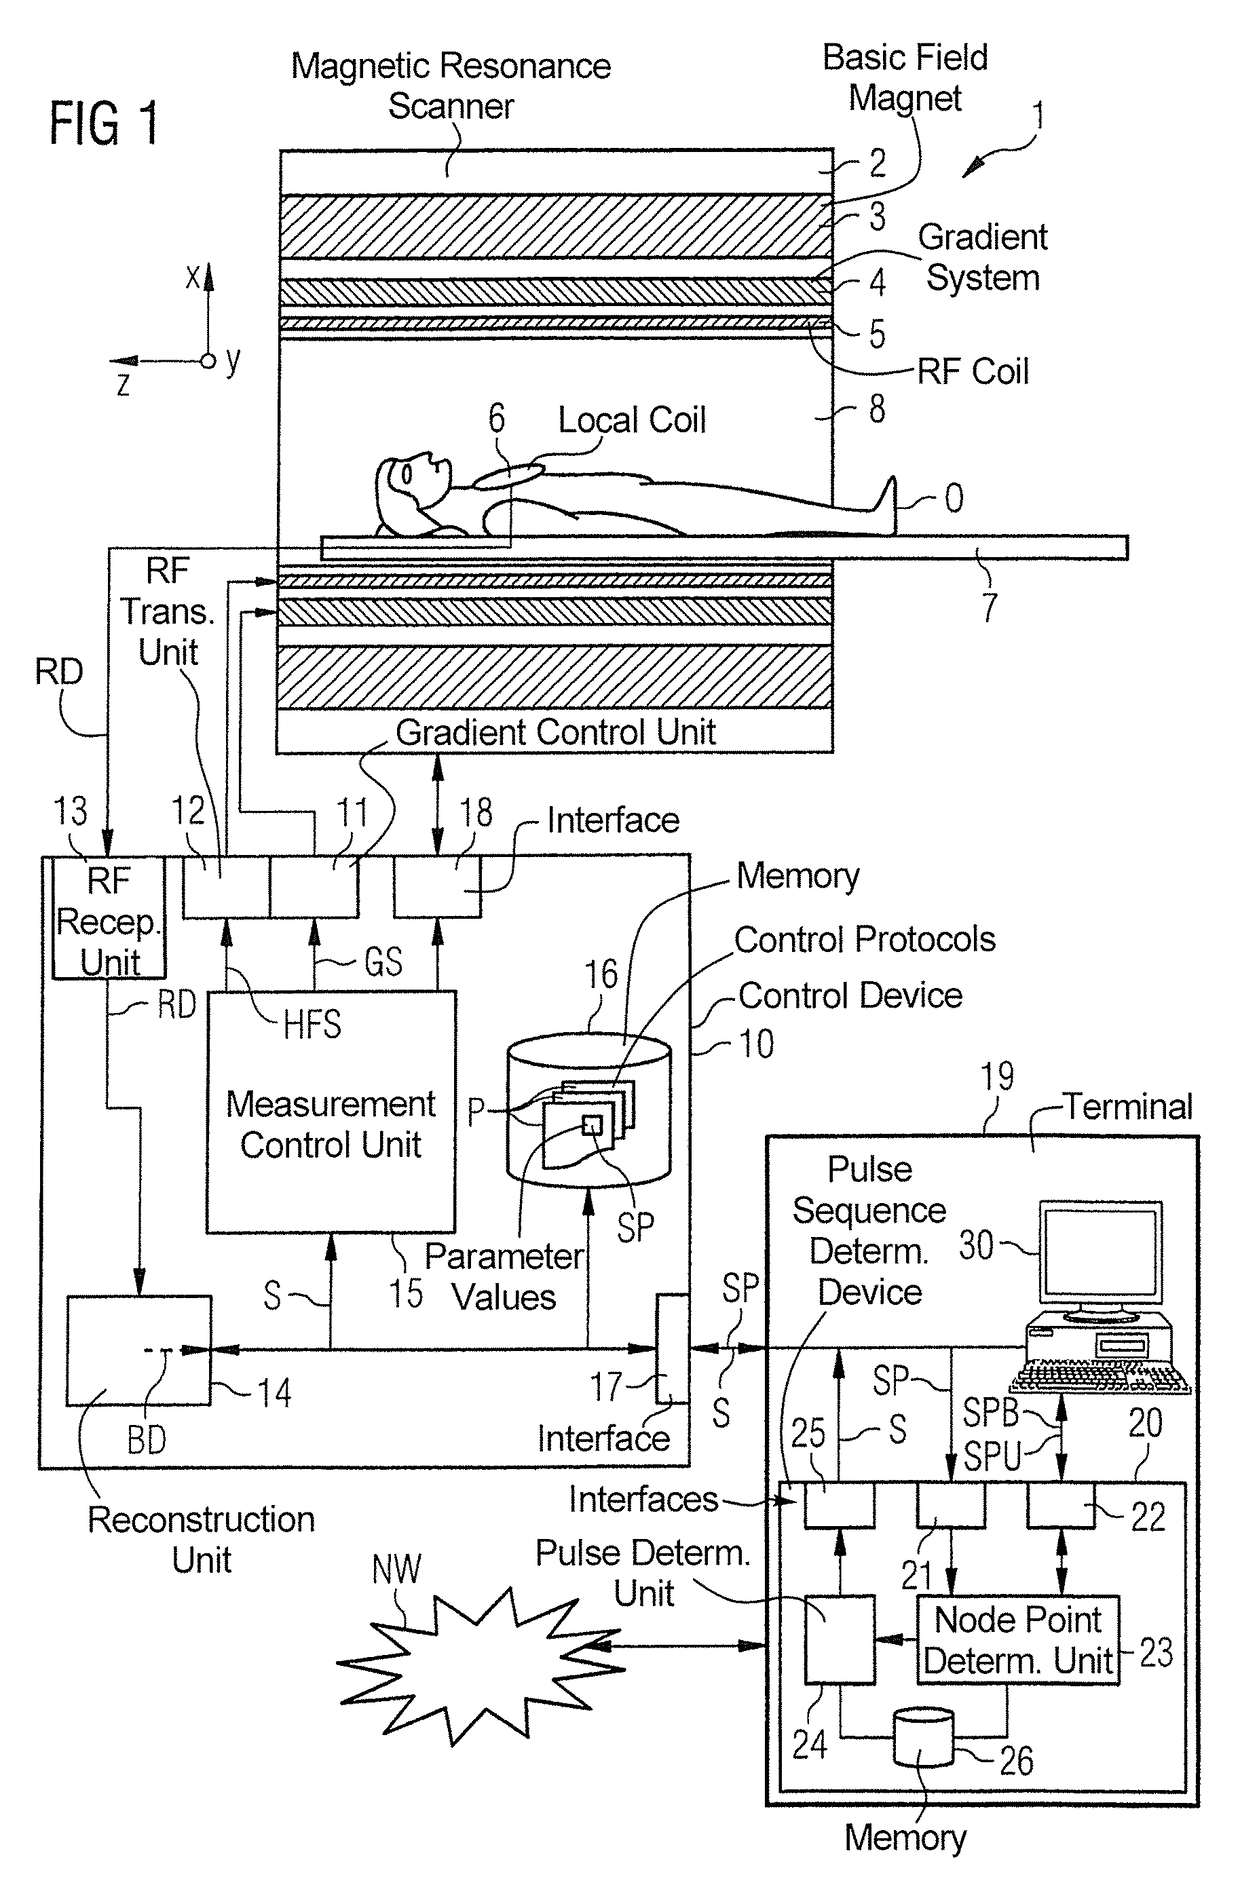 Determination of a pulse sequence for a magnetic resonance system